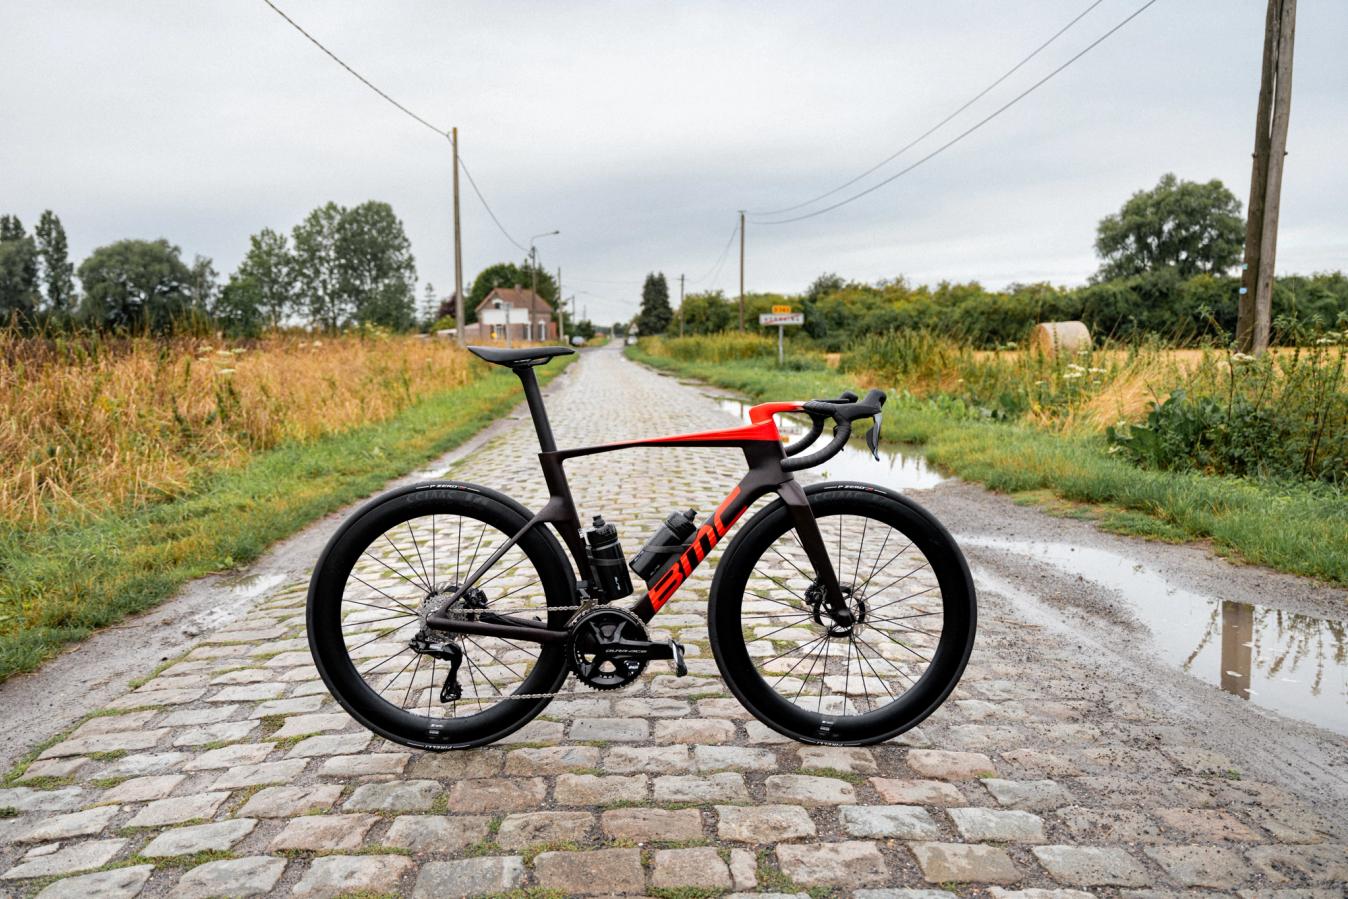 BMC has designed the bike to blend aerodynamics and lightweight with the Teammachine R